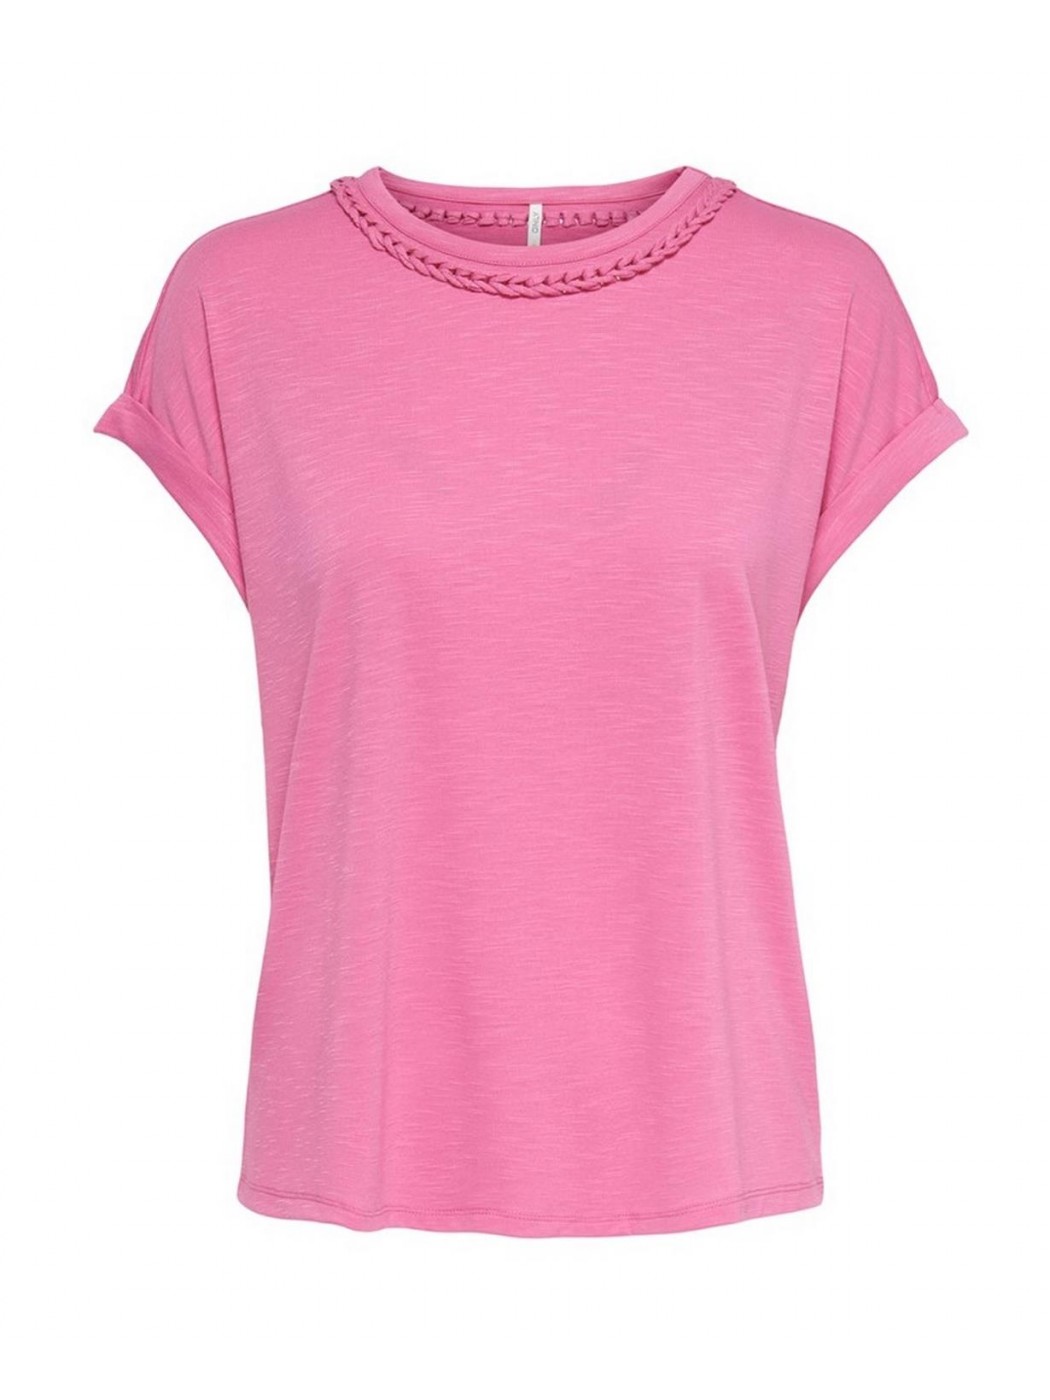 CAMISETA ONLY MUJER ROSA...